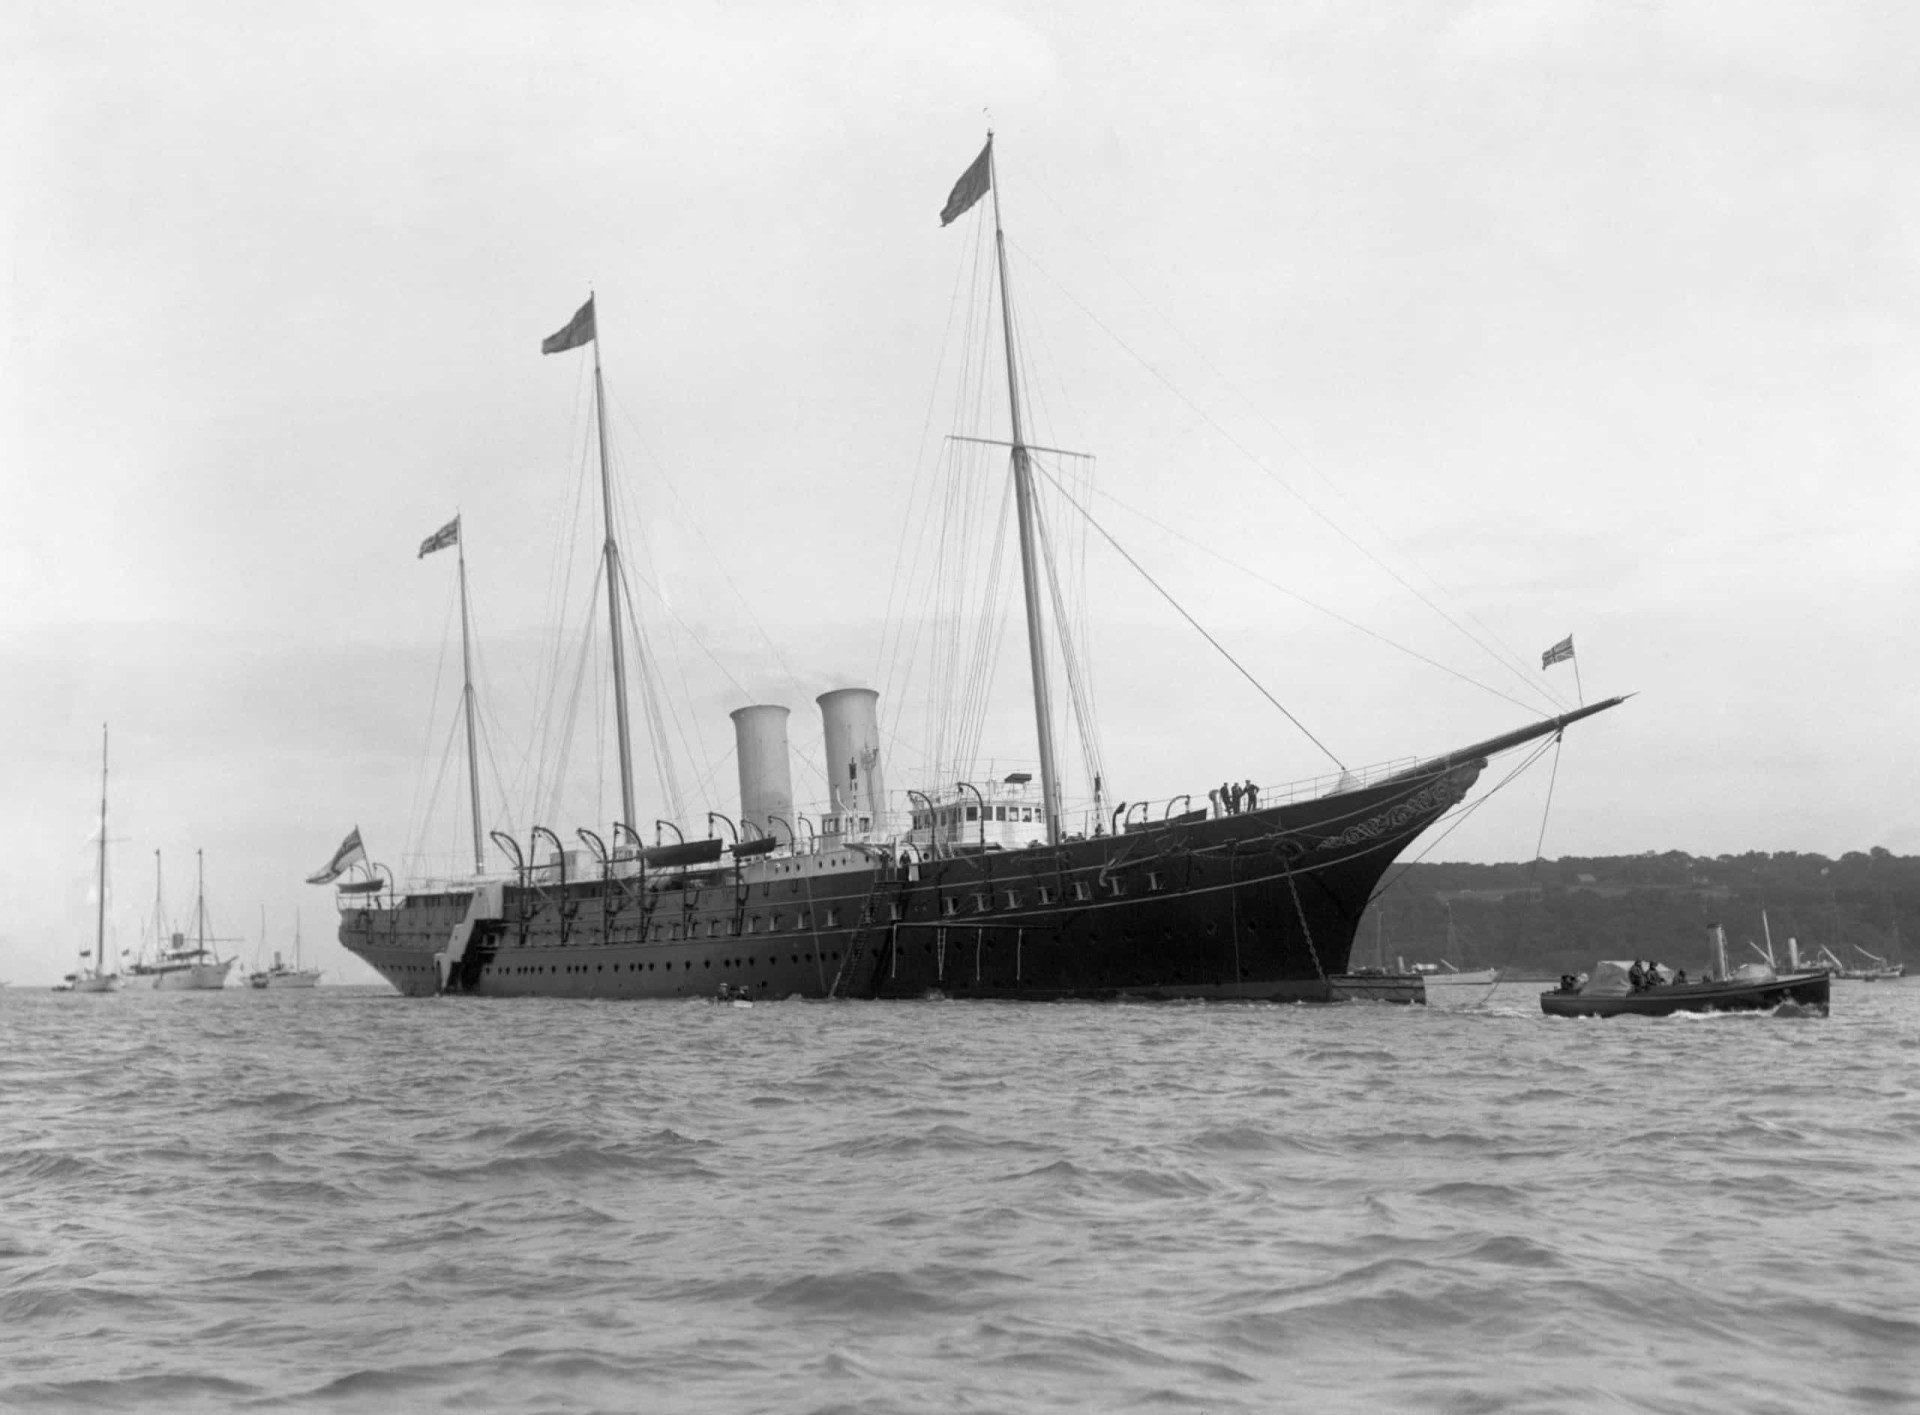 <p><em>Britannia</em>'s predecessor, HMY <em>Victoria and Albert III</em>, is pictured at anchor in the Solent off Portsmouth harbor. Built for Queen <a href="https://www.starsinsider.com/lifestyle/226263/incredible-photos-from-the-victorian-era" rel="noopener">Victoria</a>, this was the first royal yacht not to be powered by sail. She was decommissioned in 1939.</p><p><a href="https://www.msn.com/en-ph/community/channel/vid-7xx8mnucu55yw63we9va2gwr7uihbxwc68fxqp25x6tg4ftibpra?cvid=94631541bc0f4f89bfd59158d696ad7e">Follow us and access great exclusive content every day</a></p>